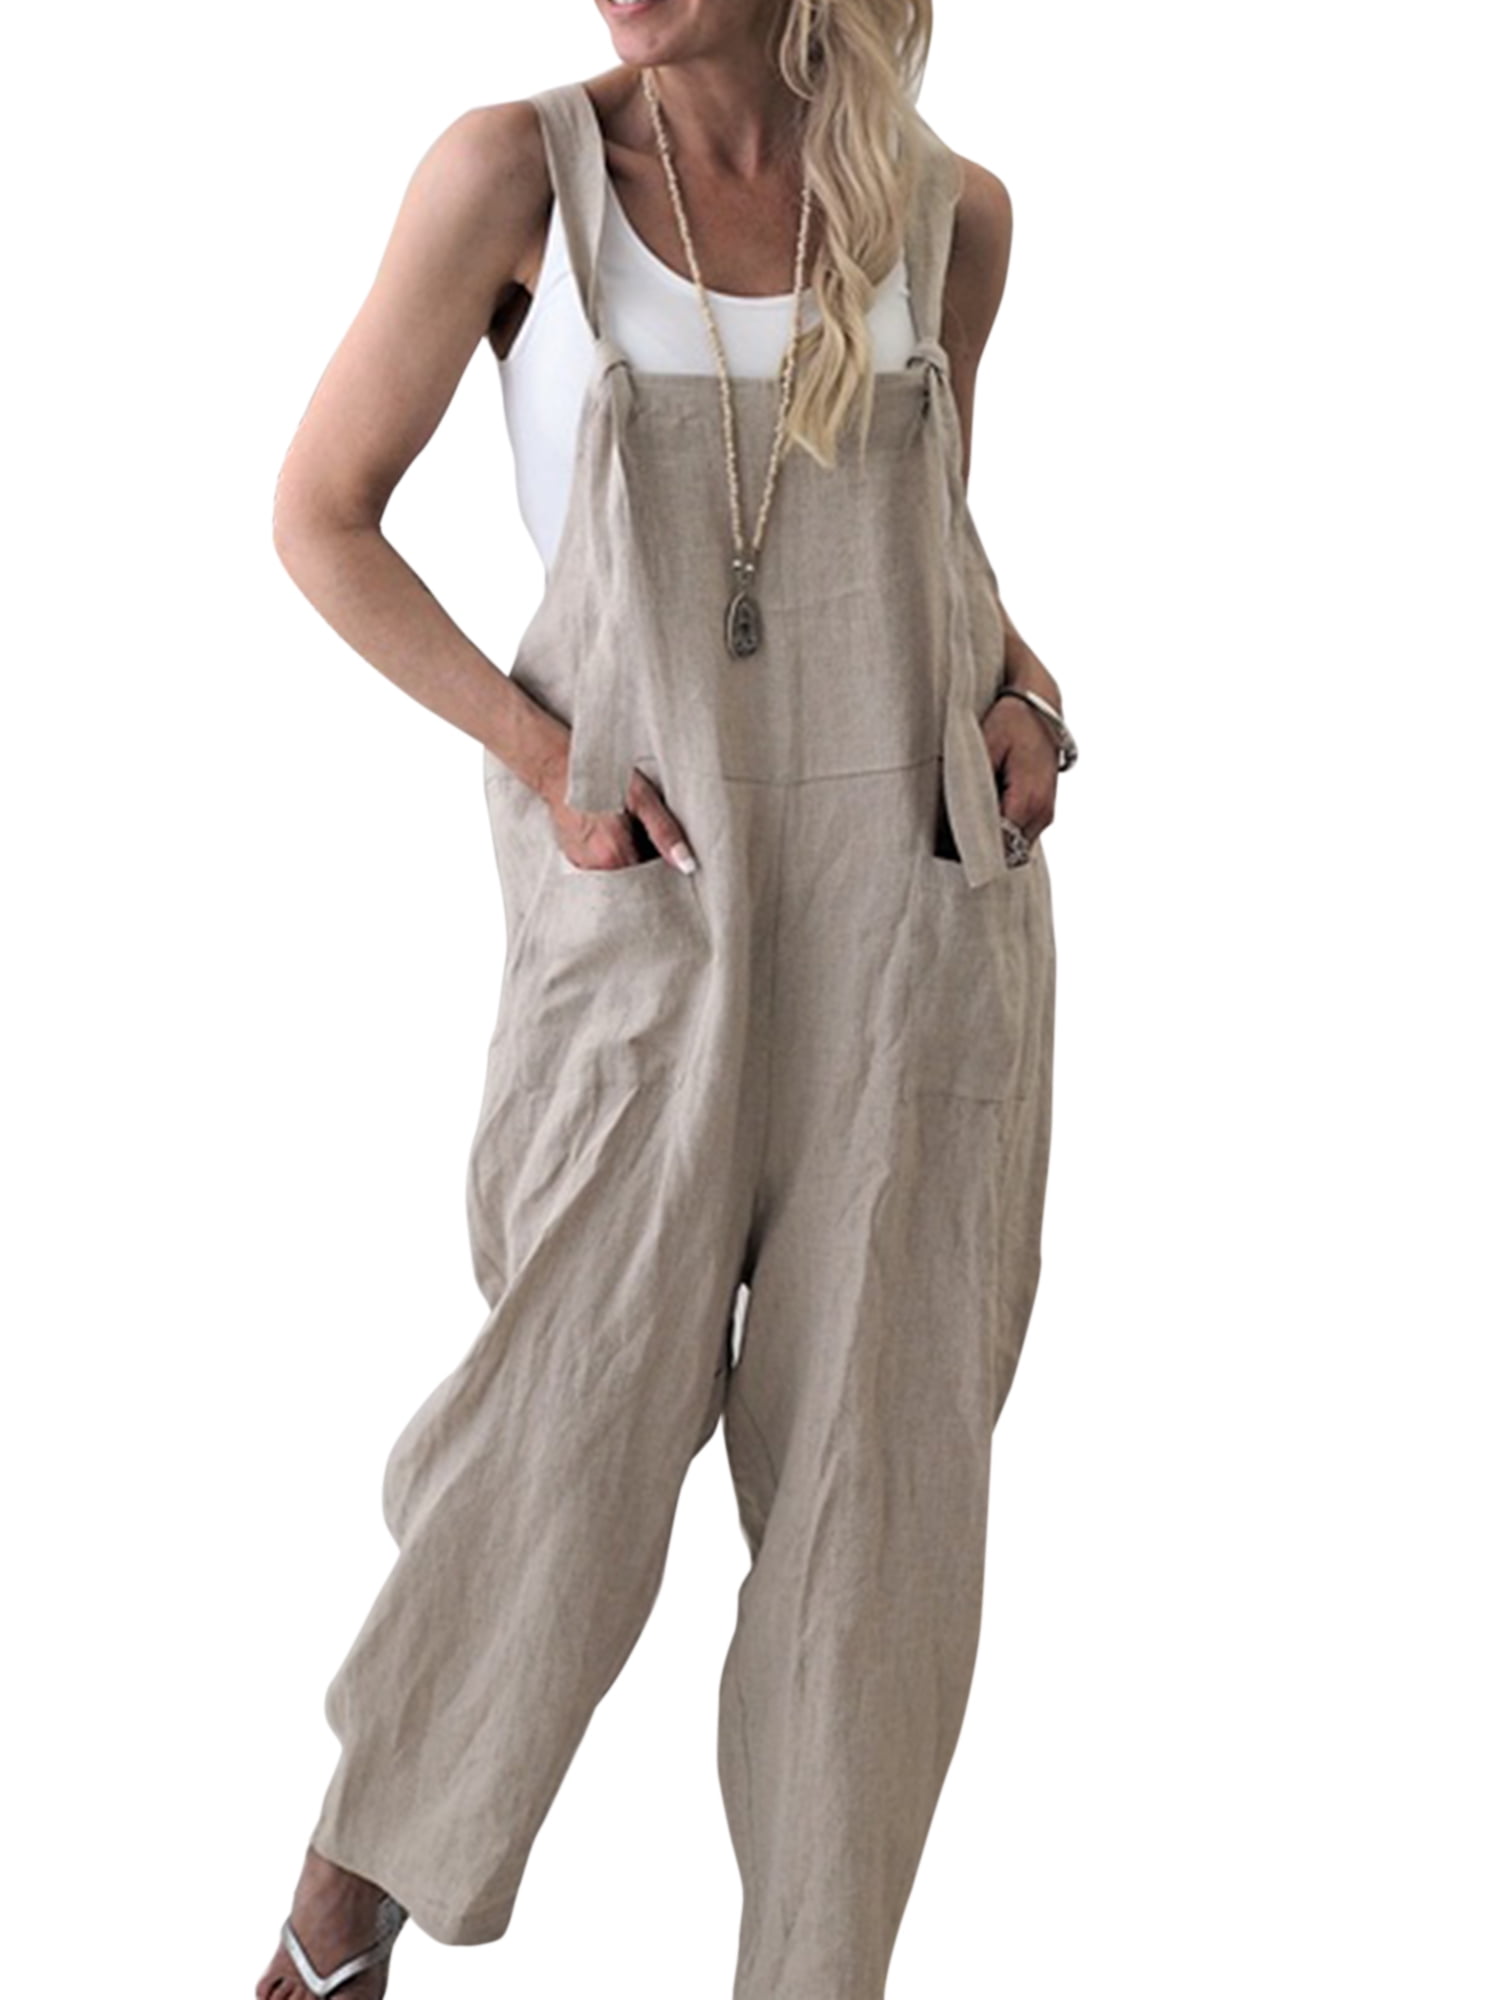 Women Loose Baggy Sleeveless Overall Long Jumpsuit Playsuit Trousers Harem Pants 